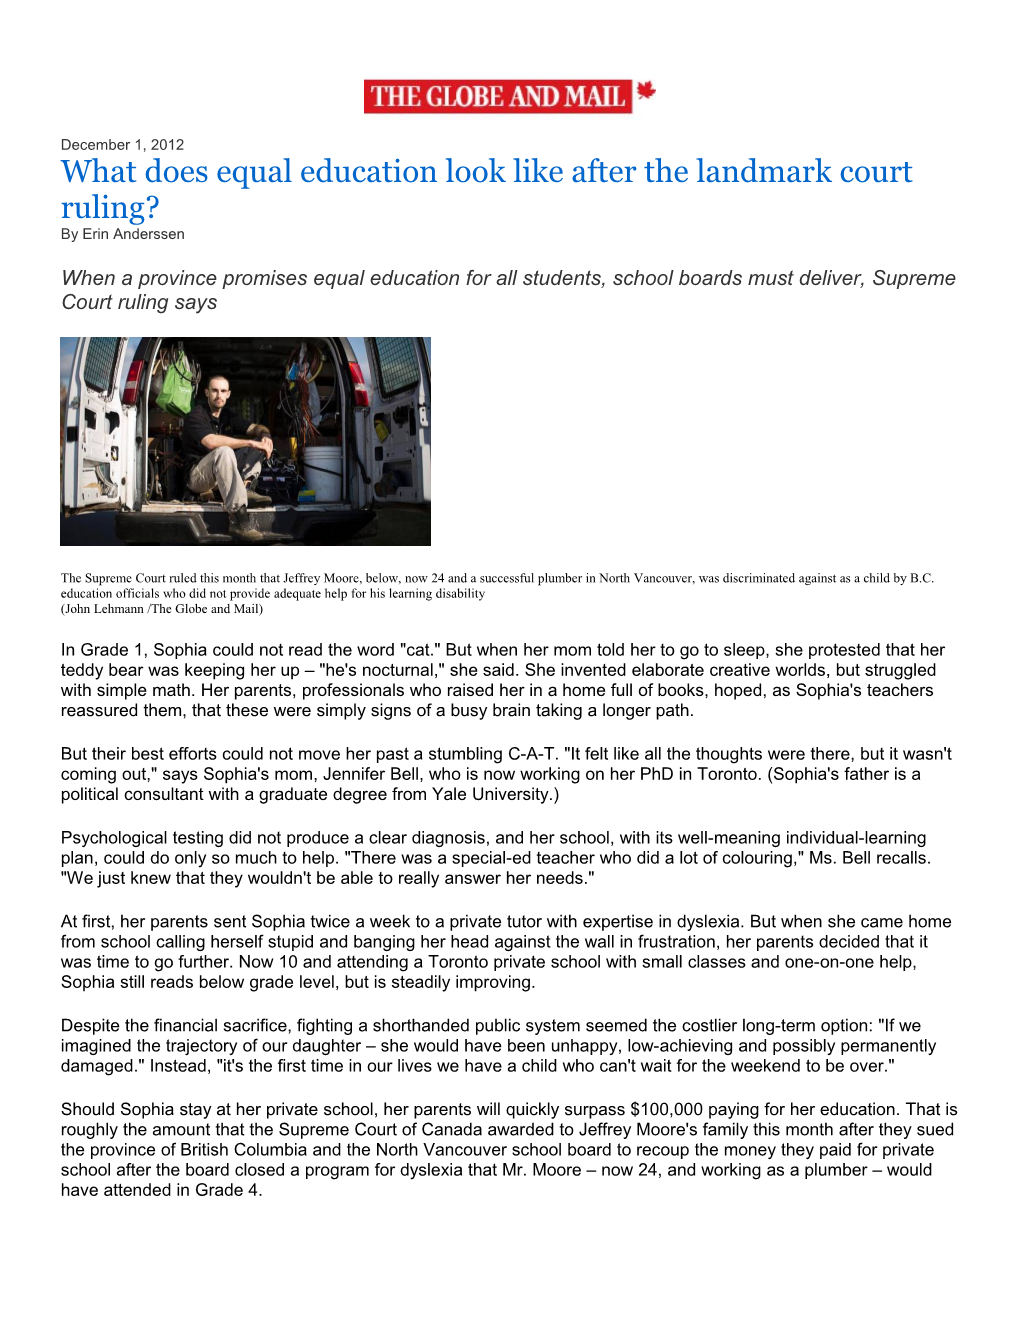 What Does Equal Education Look Like After the Landmark Court Ruling?